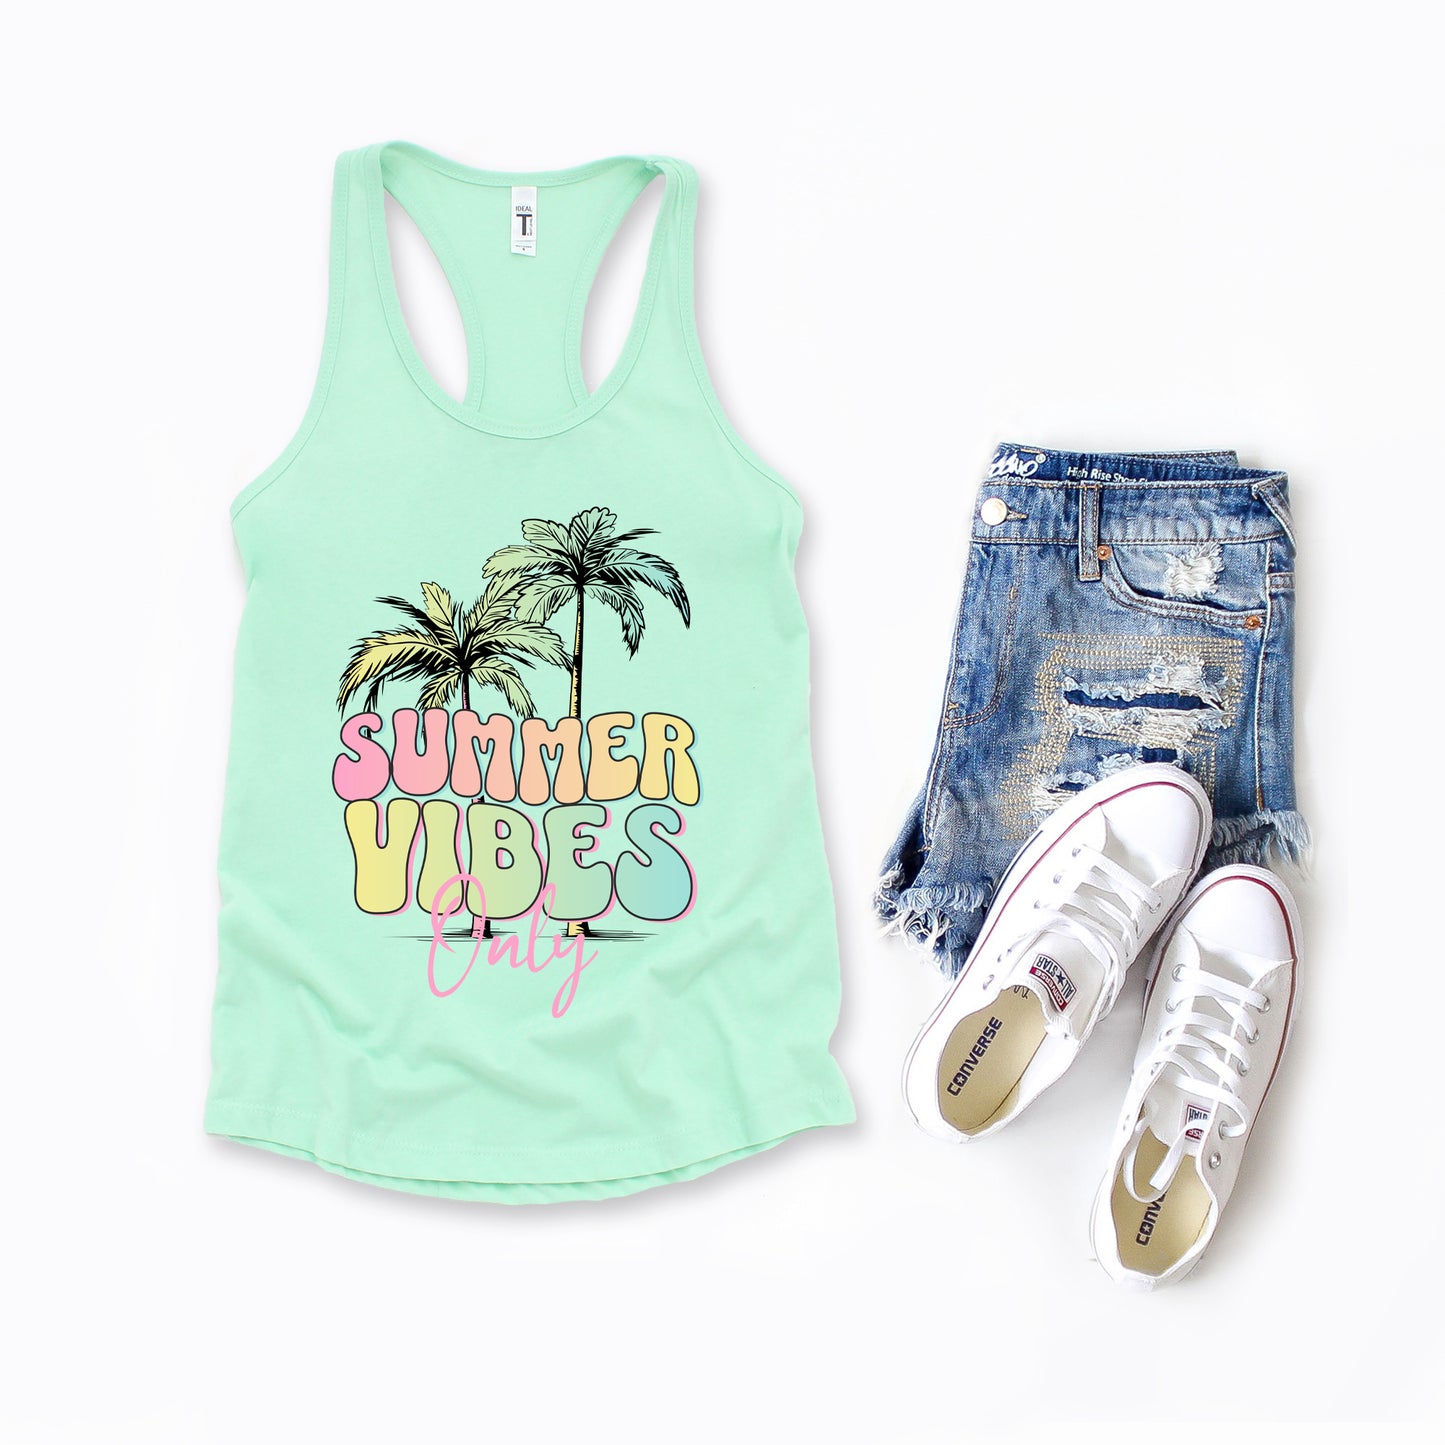 Summer Vibes Only | Racerback Tank